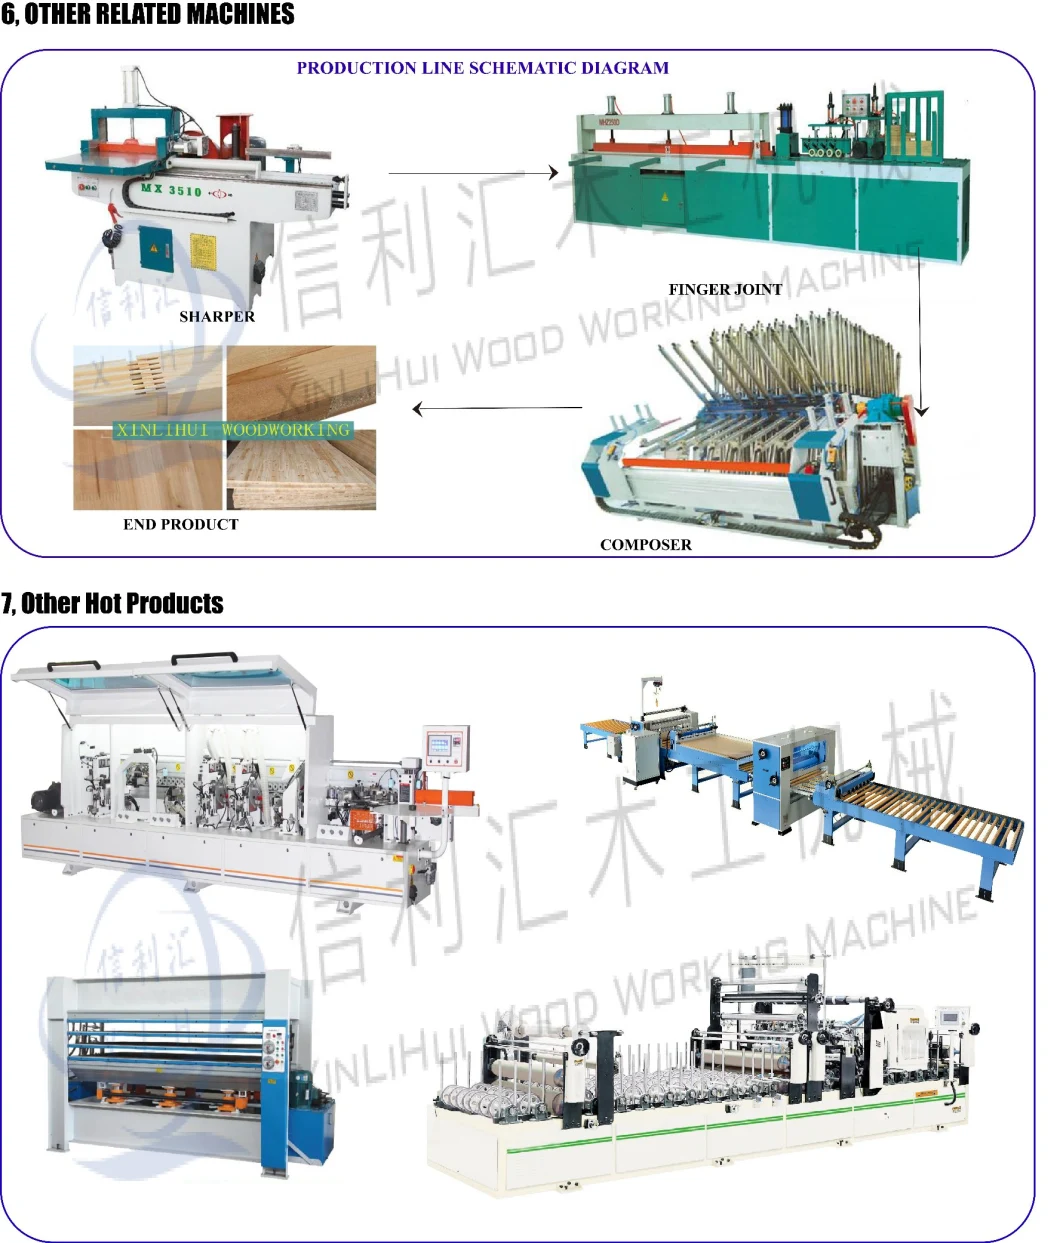 Woodworking Automatic Finger Joint Assemble / Finger Joint Machine Small Wood Pieces Jointing Machine/ Wood Block Connecting Machine